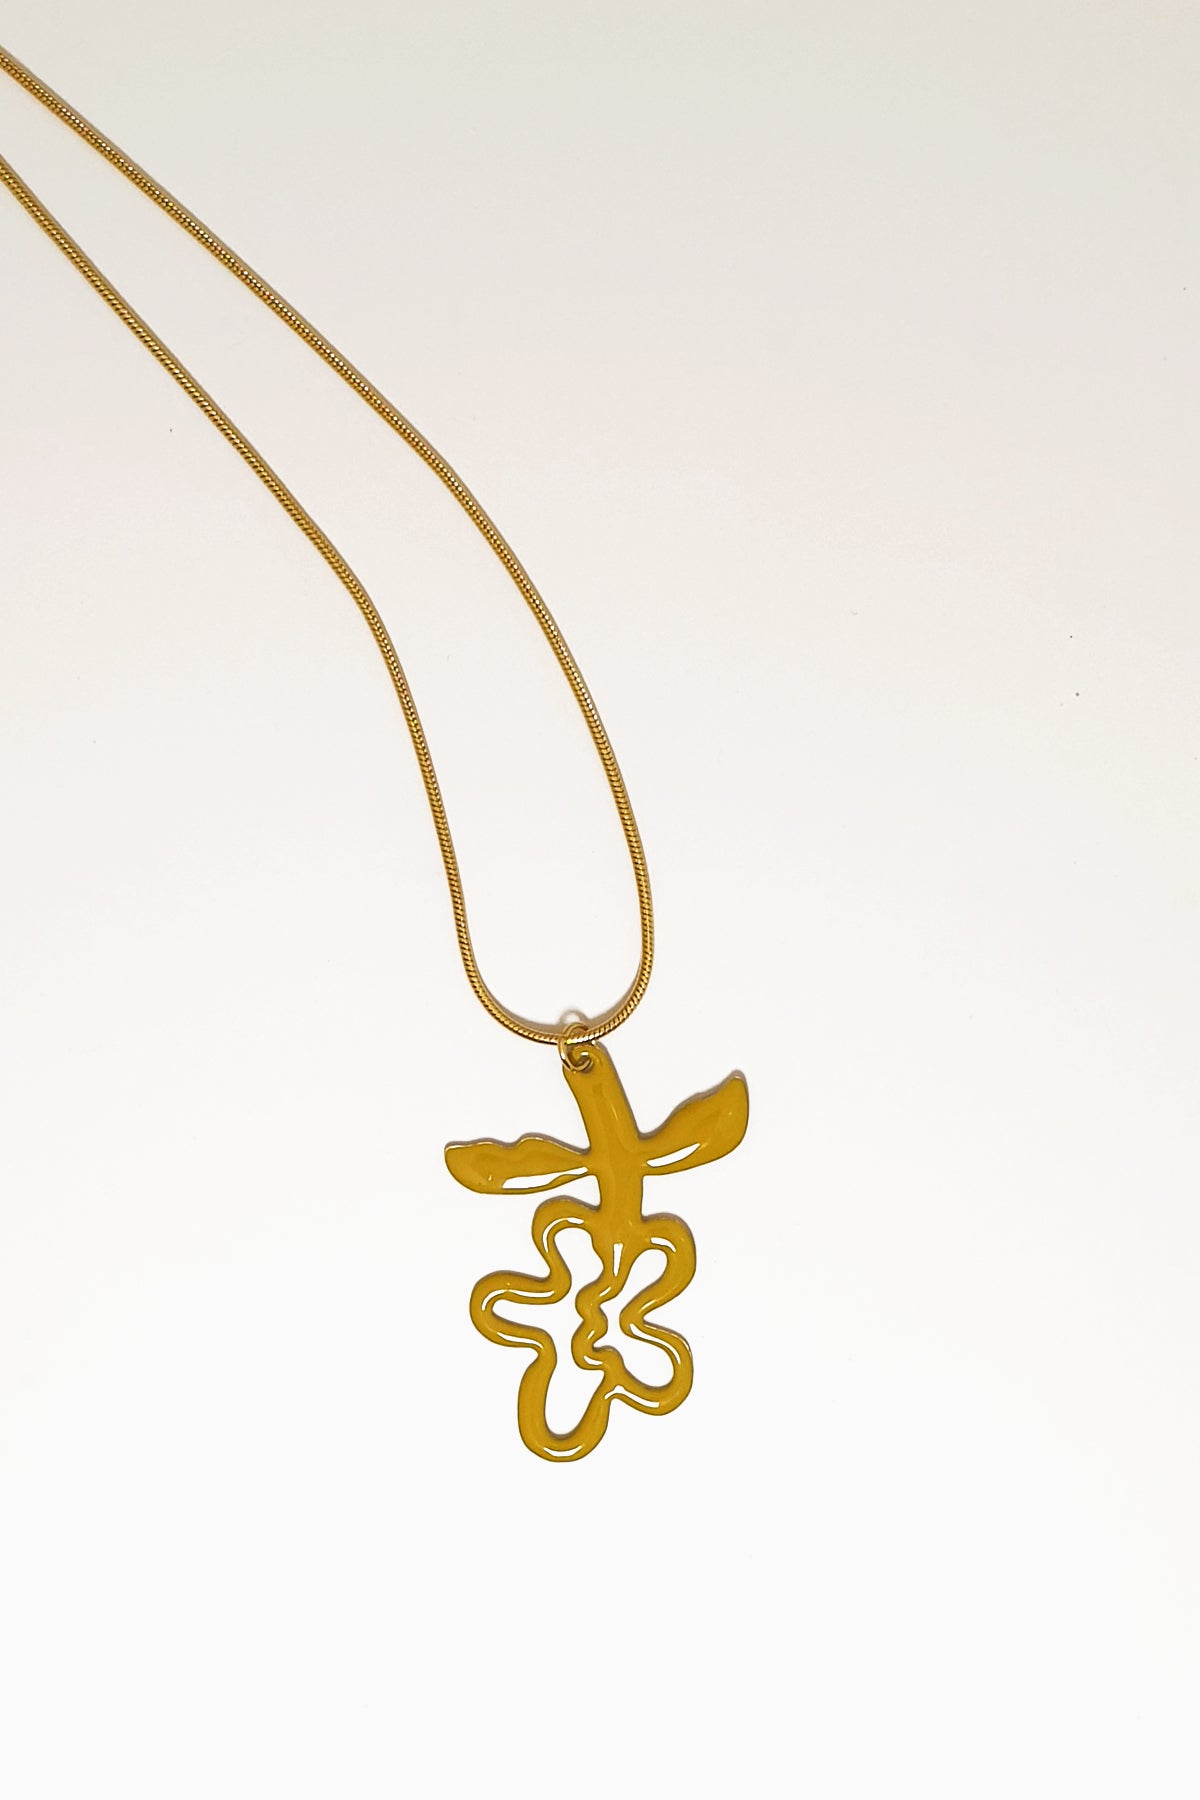 A necklace lays against a white background. It features a gold chain from which a chartreuse enamel abstract flower shape hangs upside down.